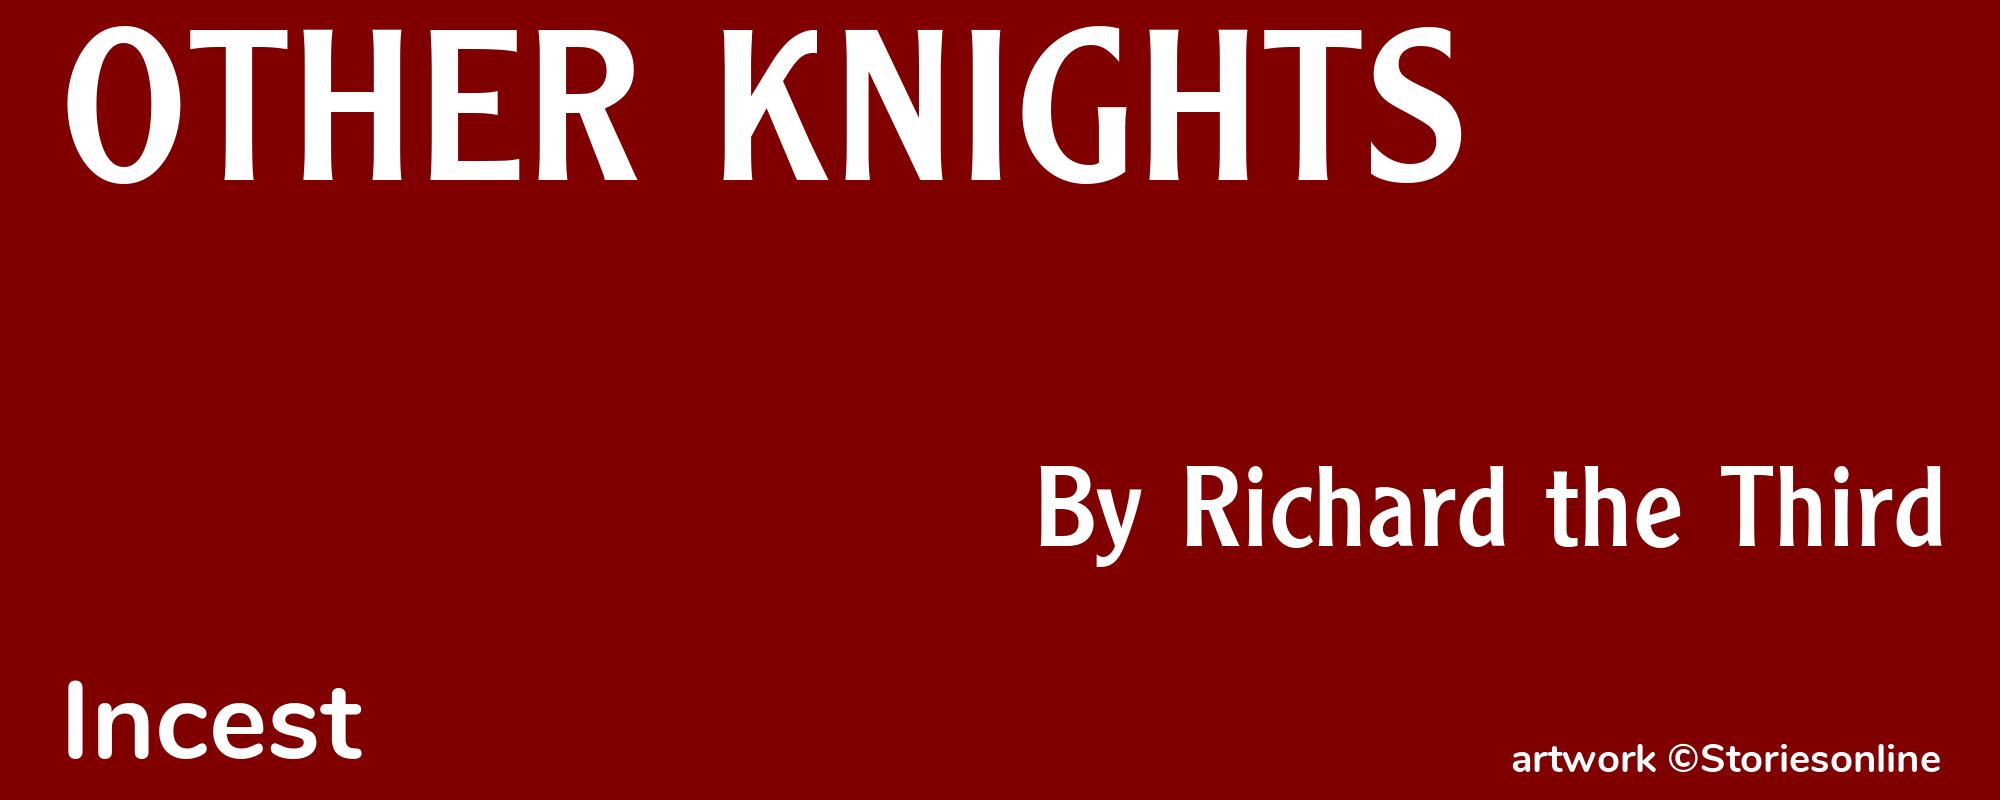 OTHER KNIGHTS - Cover